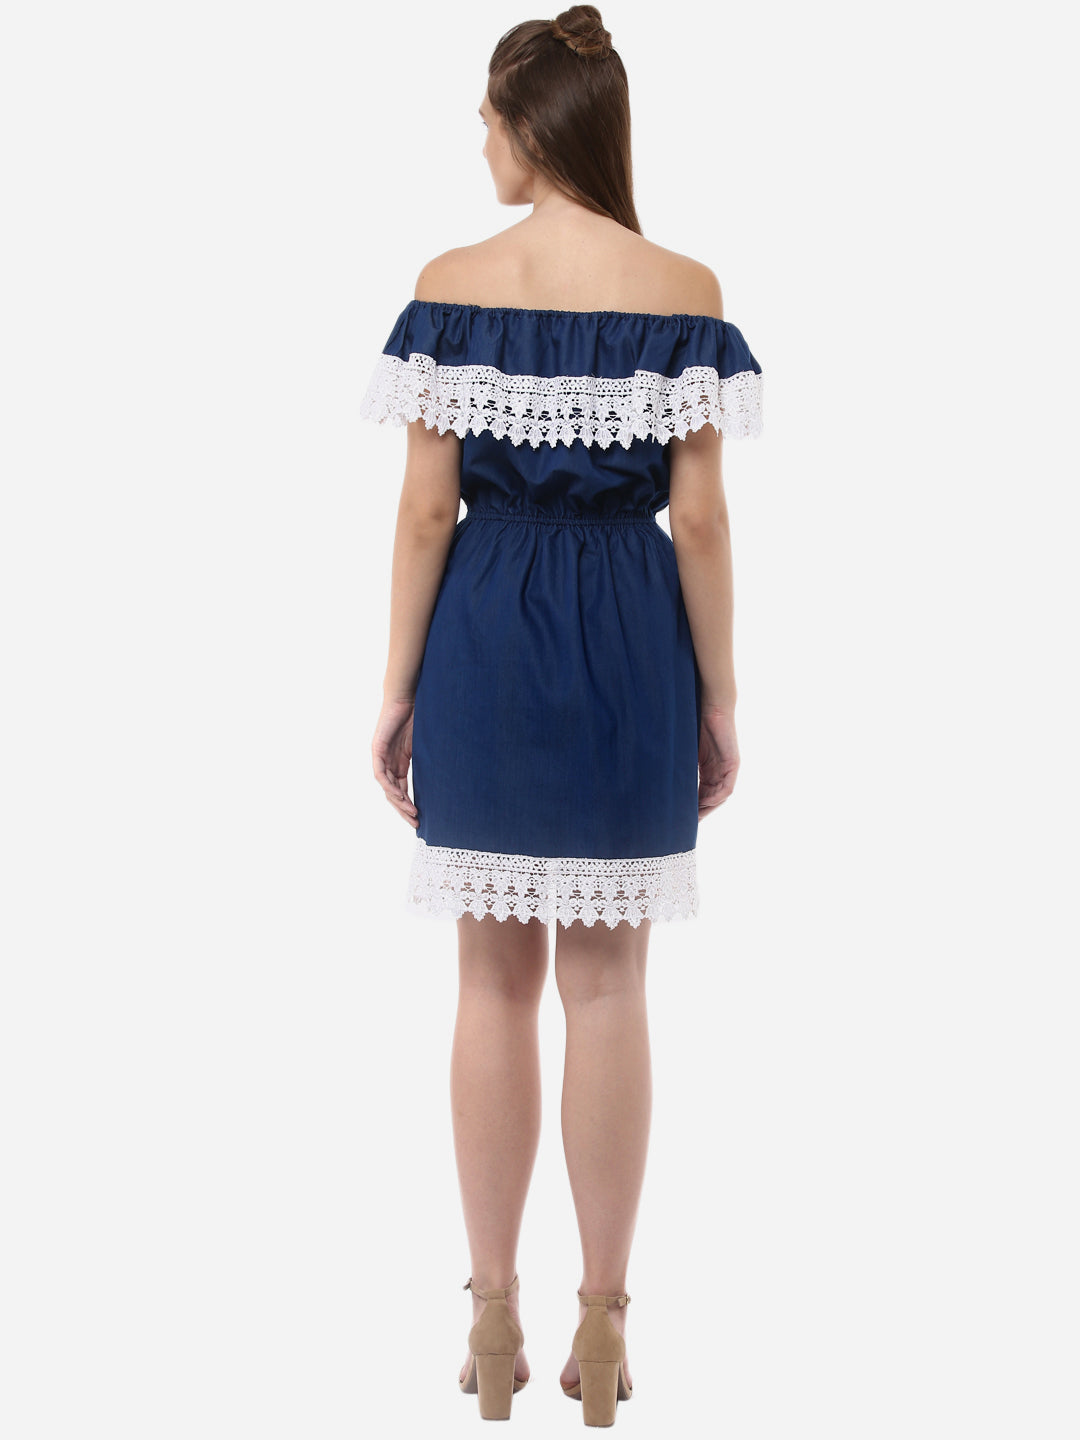 Women's OffShoulder Denim Dress with Lace Inserts